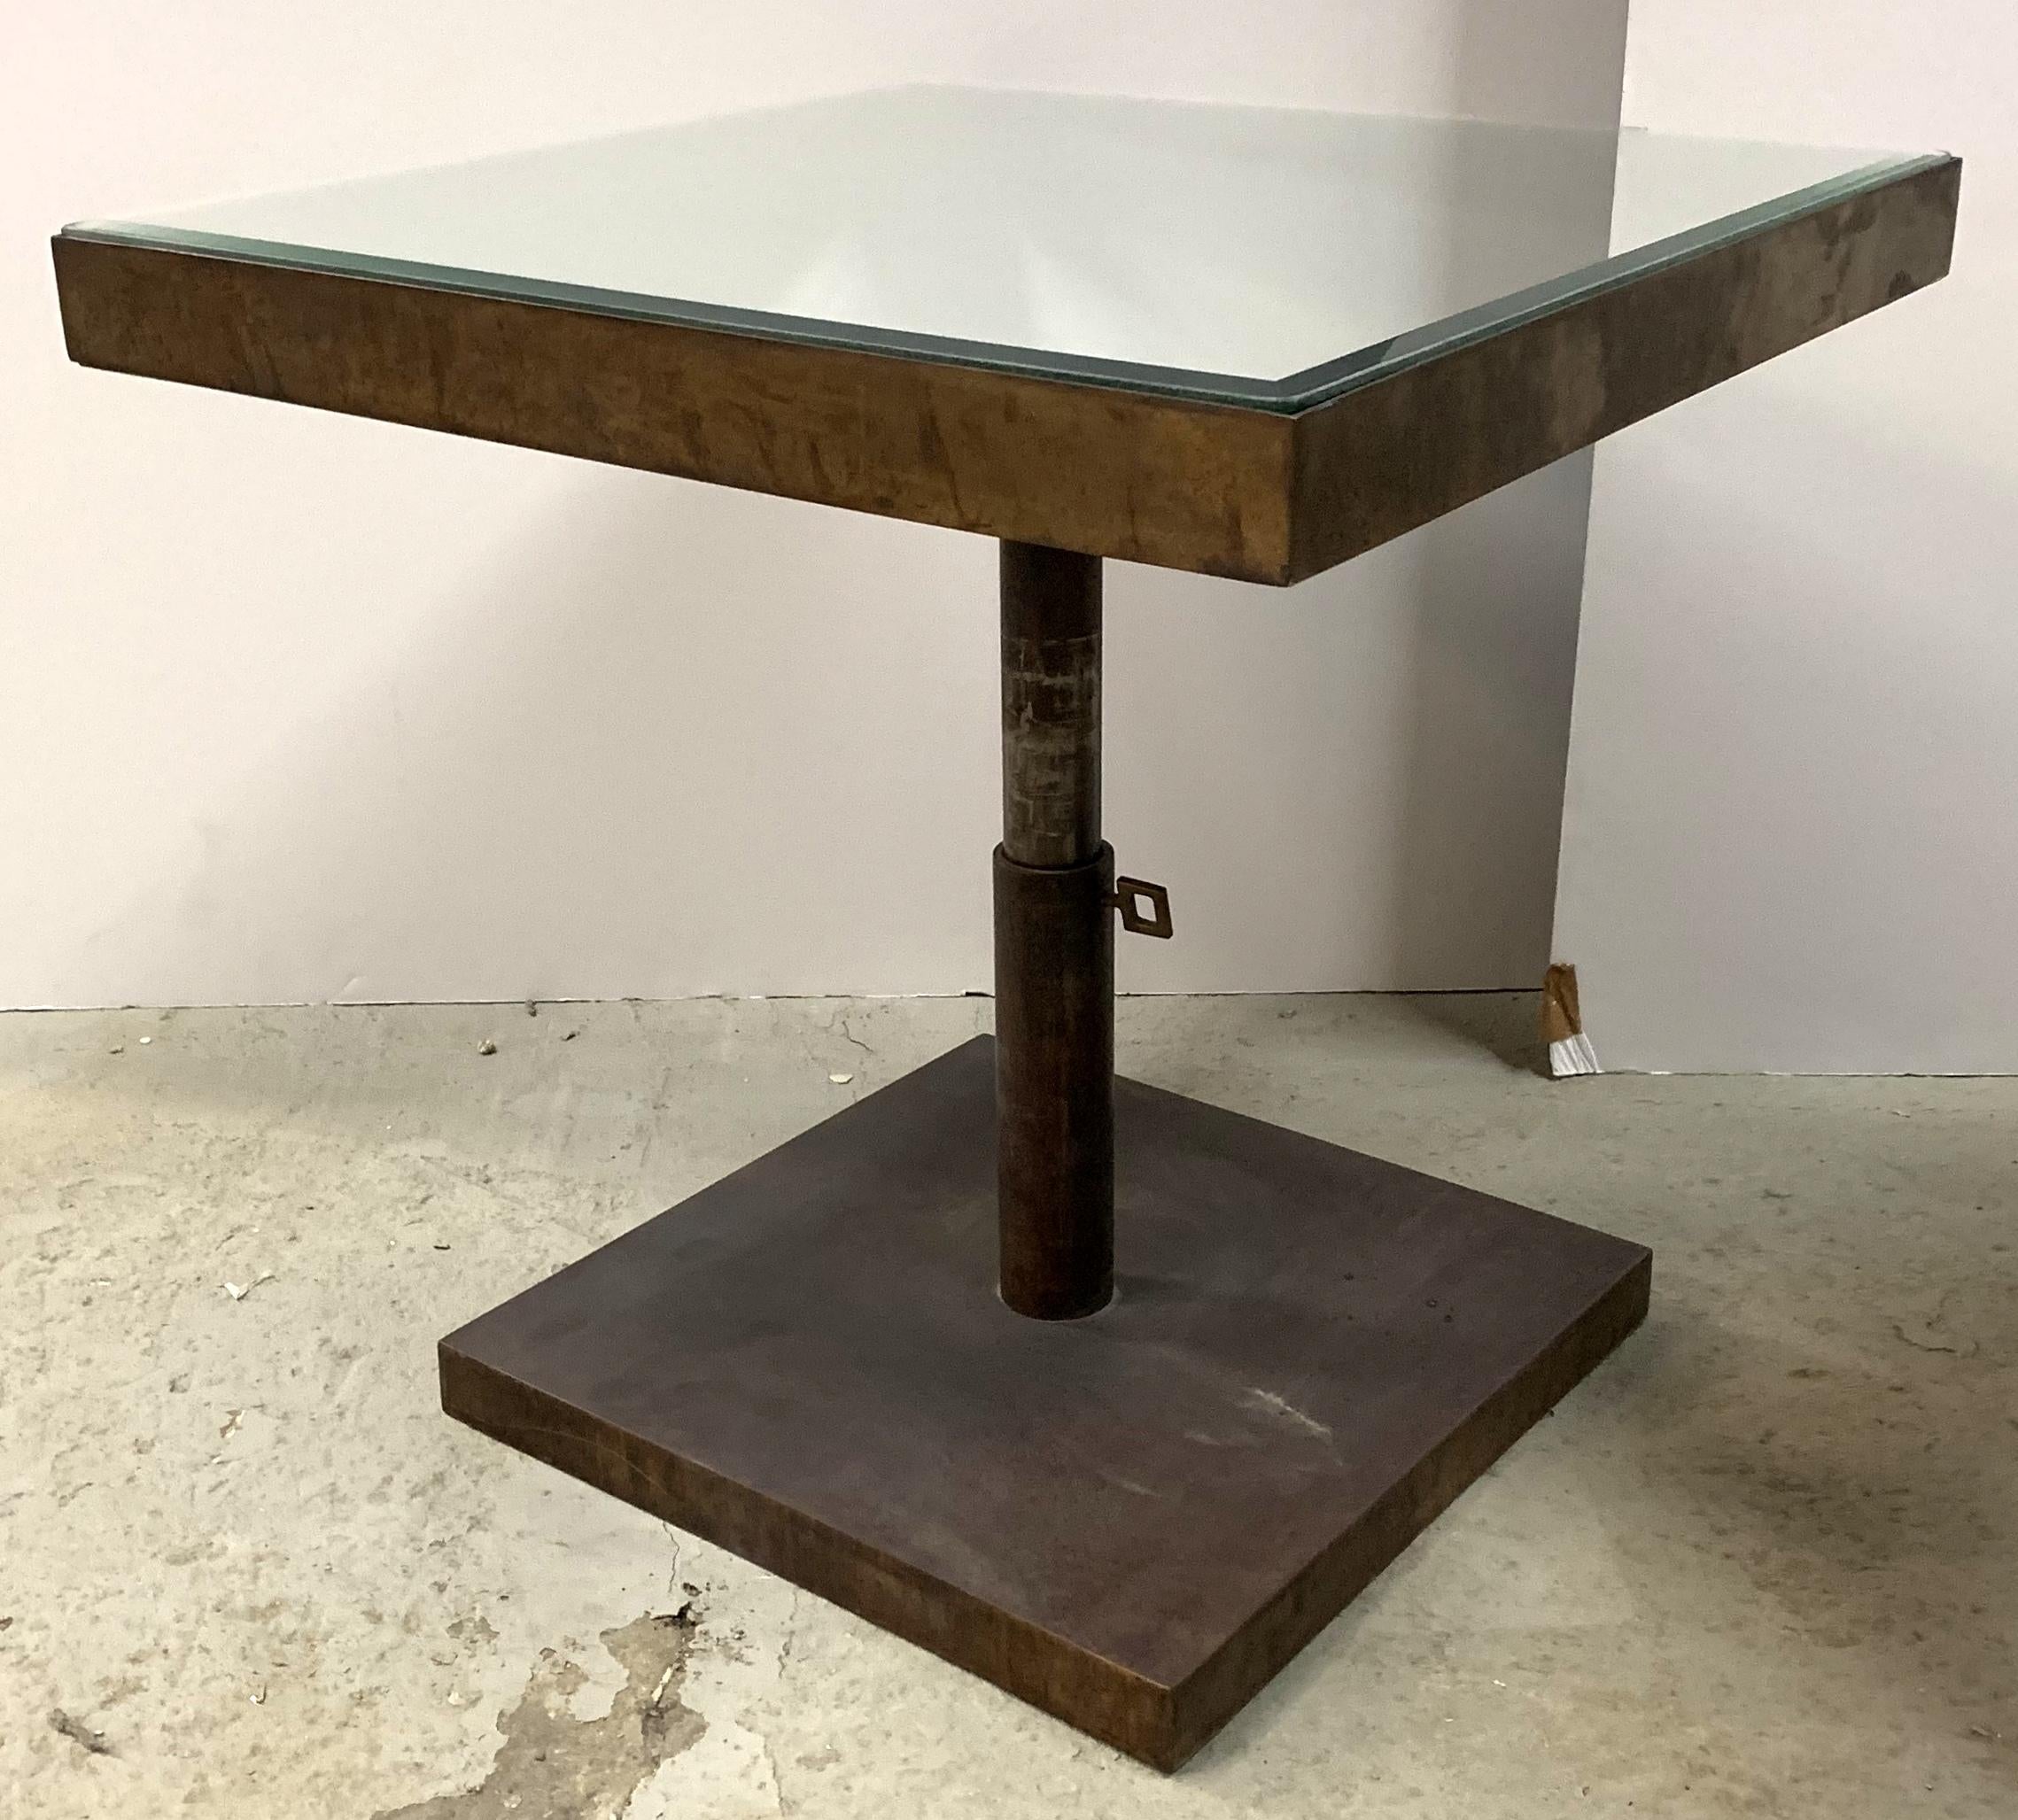 A wonderful pair of Mid-Century Modern Lorin Marsh antique bronze finish telescoping square side / end tables with beveled mirror top still being sold in the showroom. 

*Sold Separately 

The height is adjustable from 16